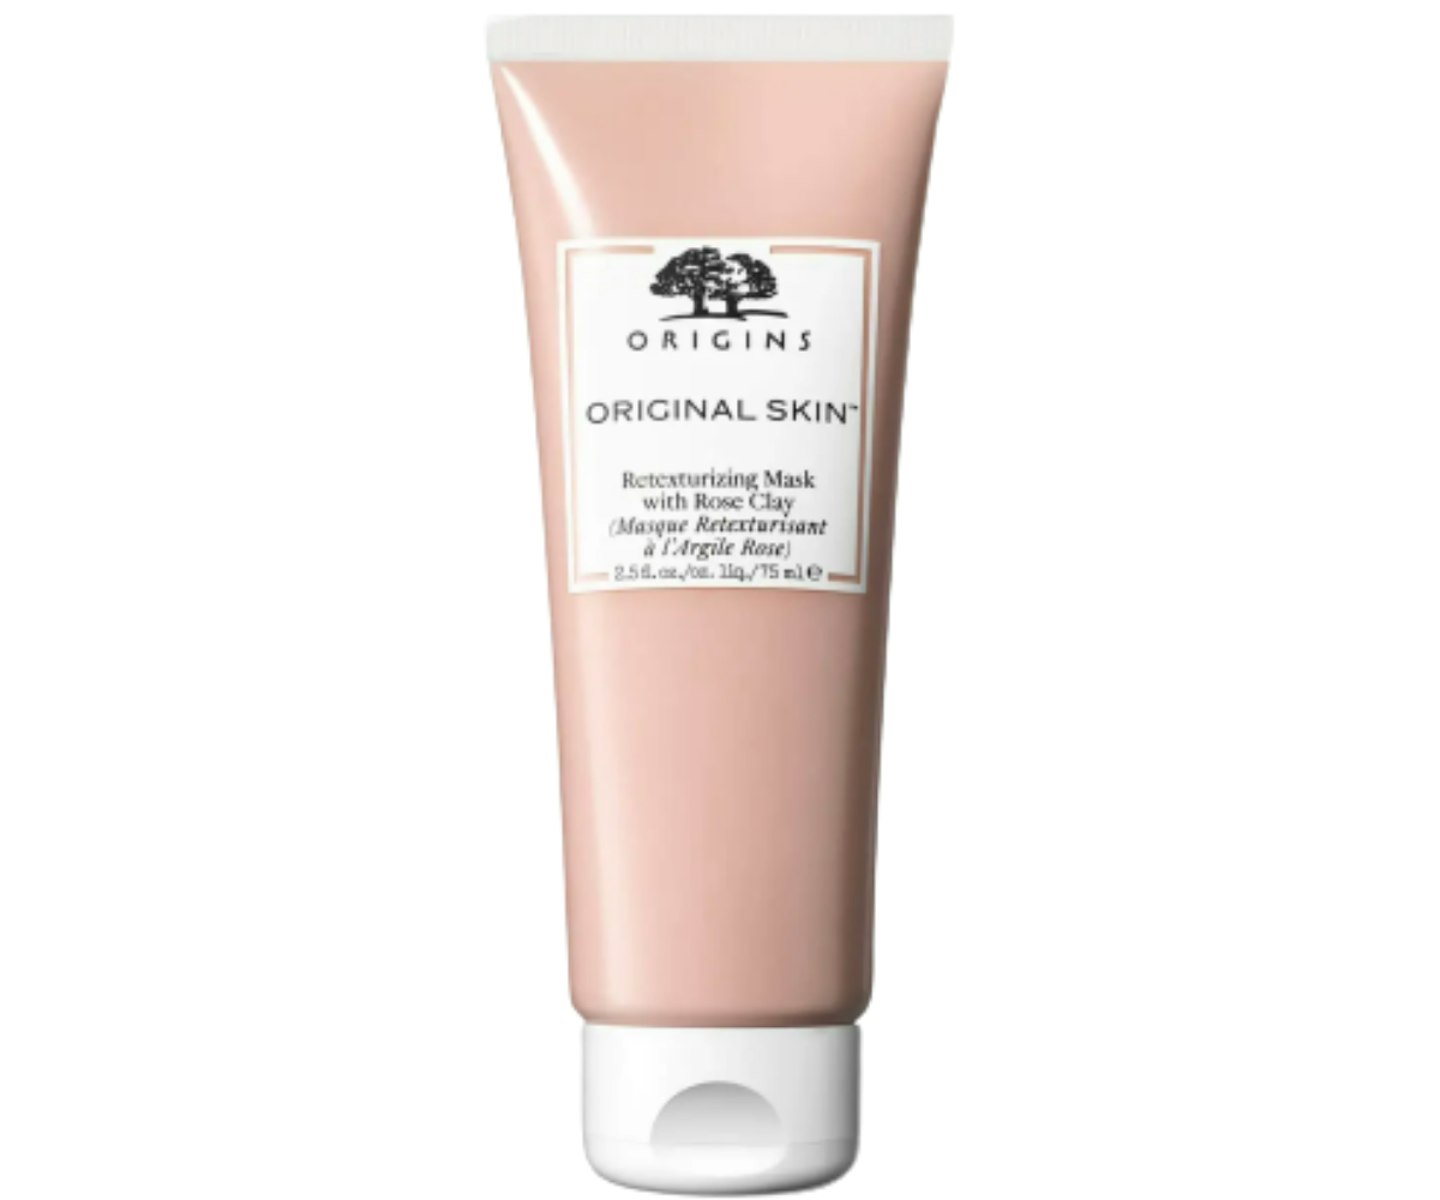 A picture of the Origins Original Skin Retexturizing Mask With Rose Clay